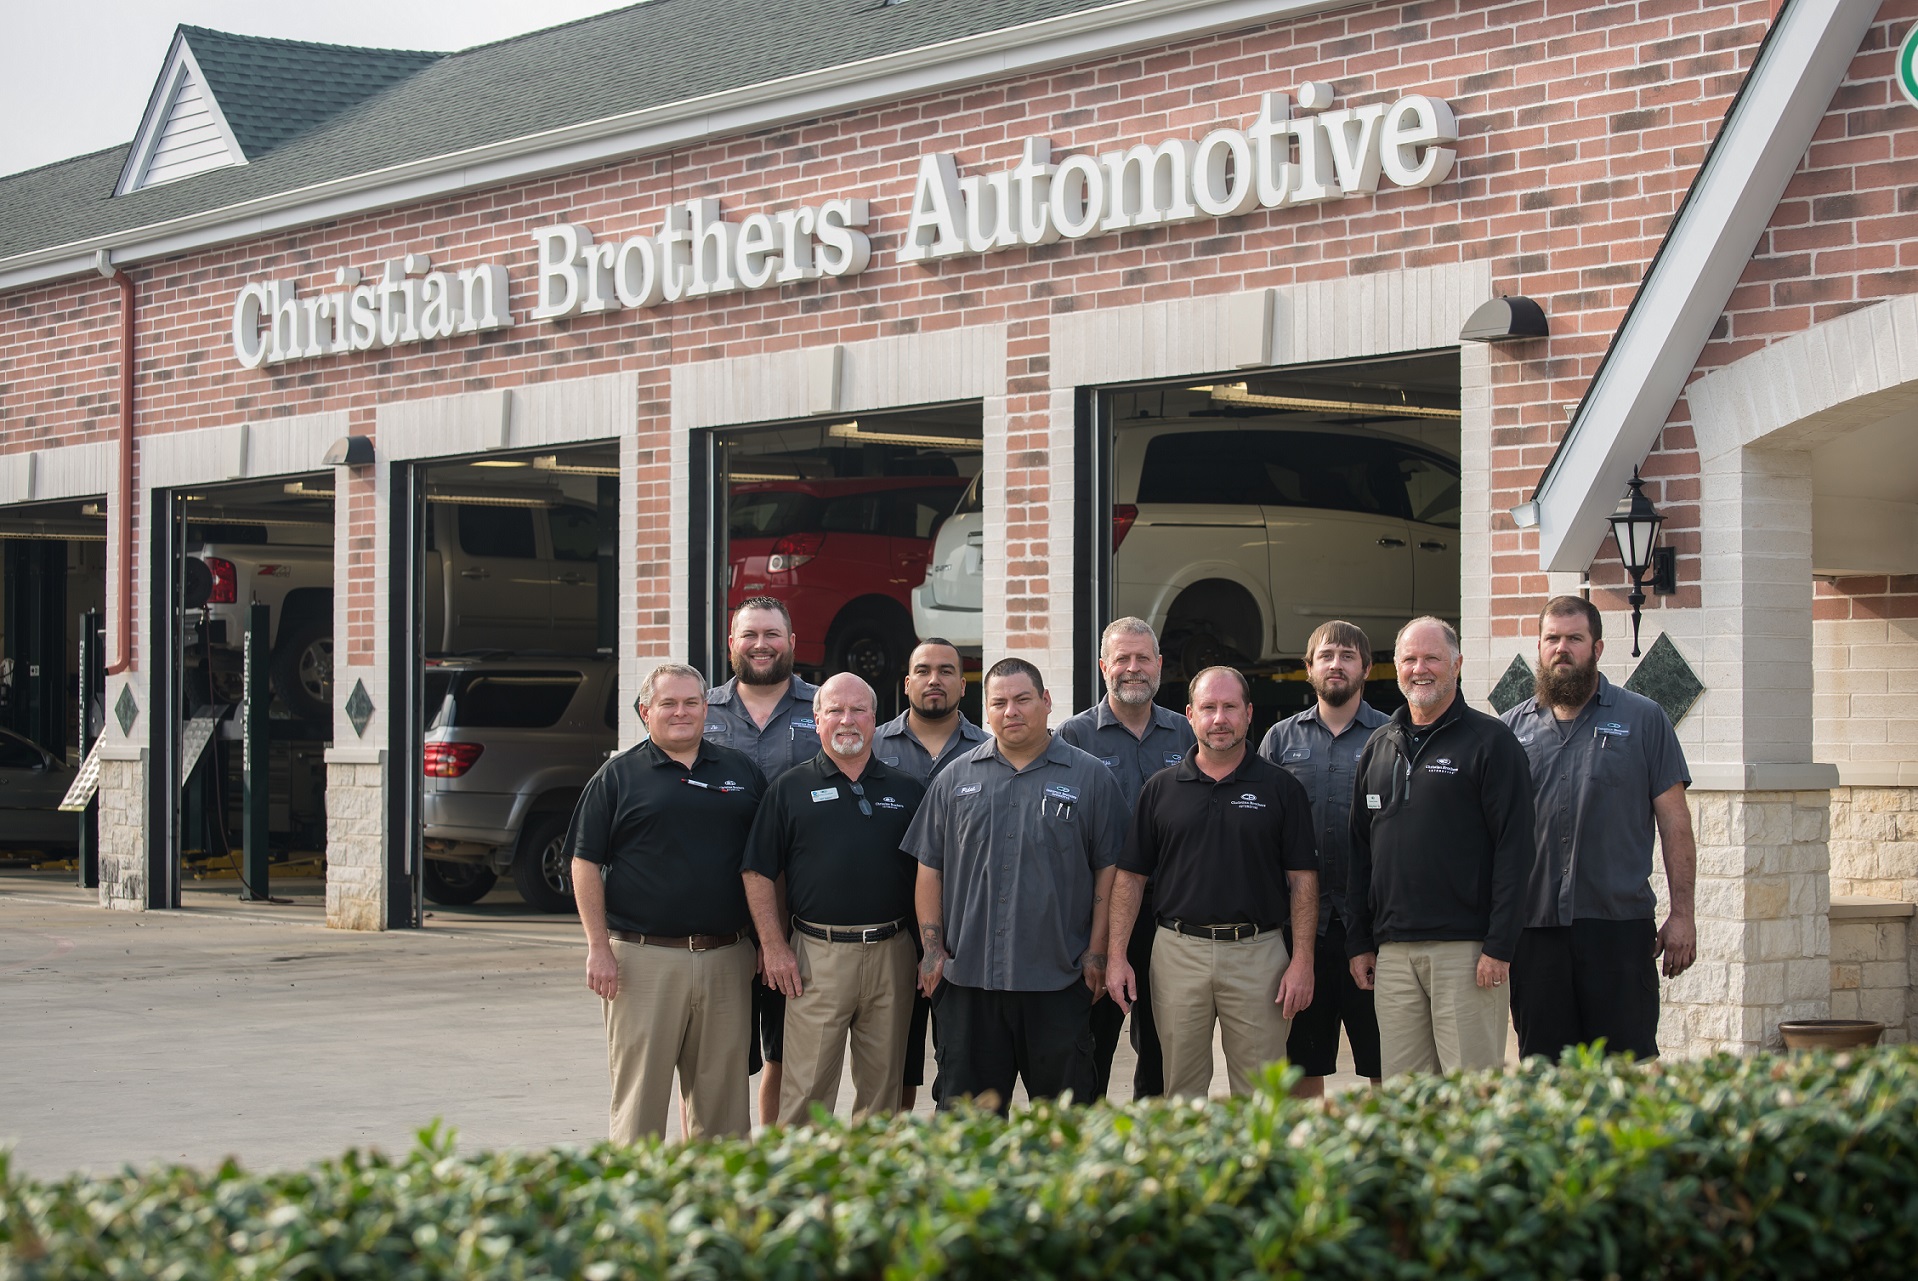 Christian Brother Automotive location in Waco, TX